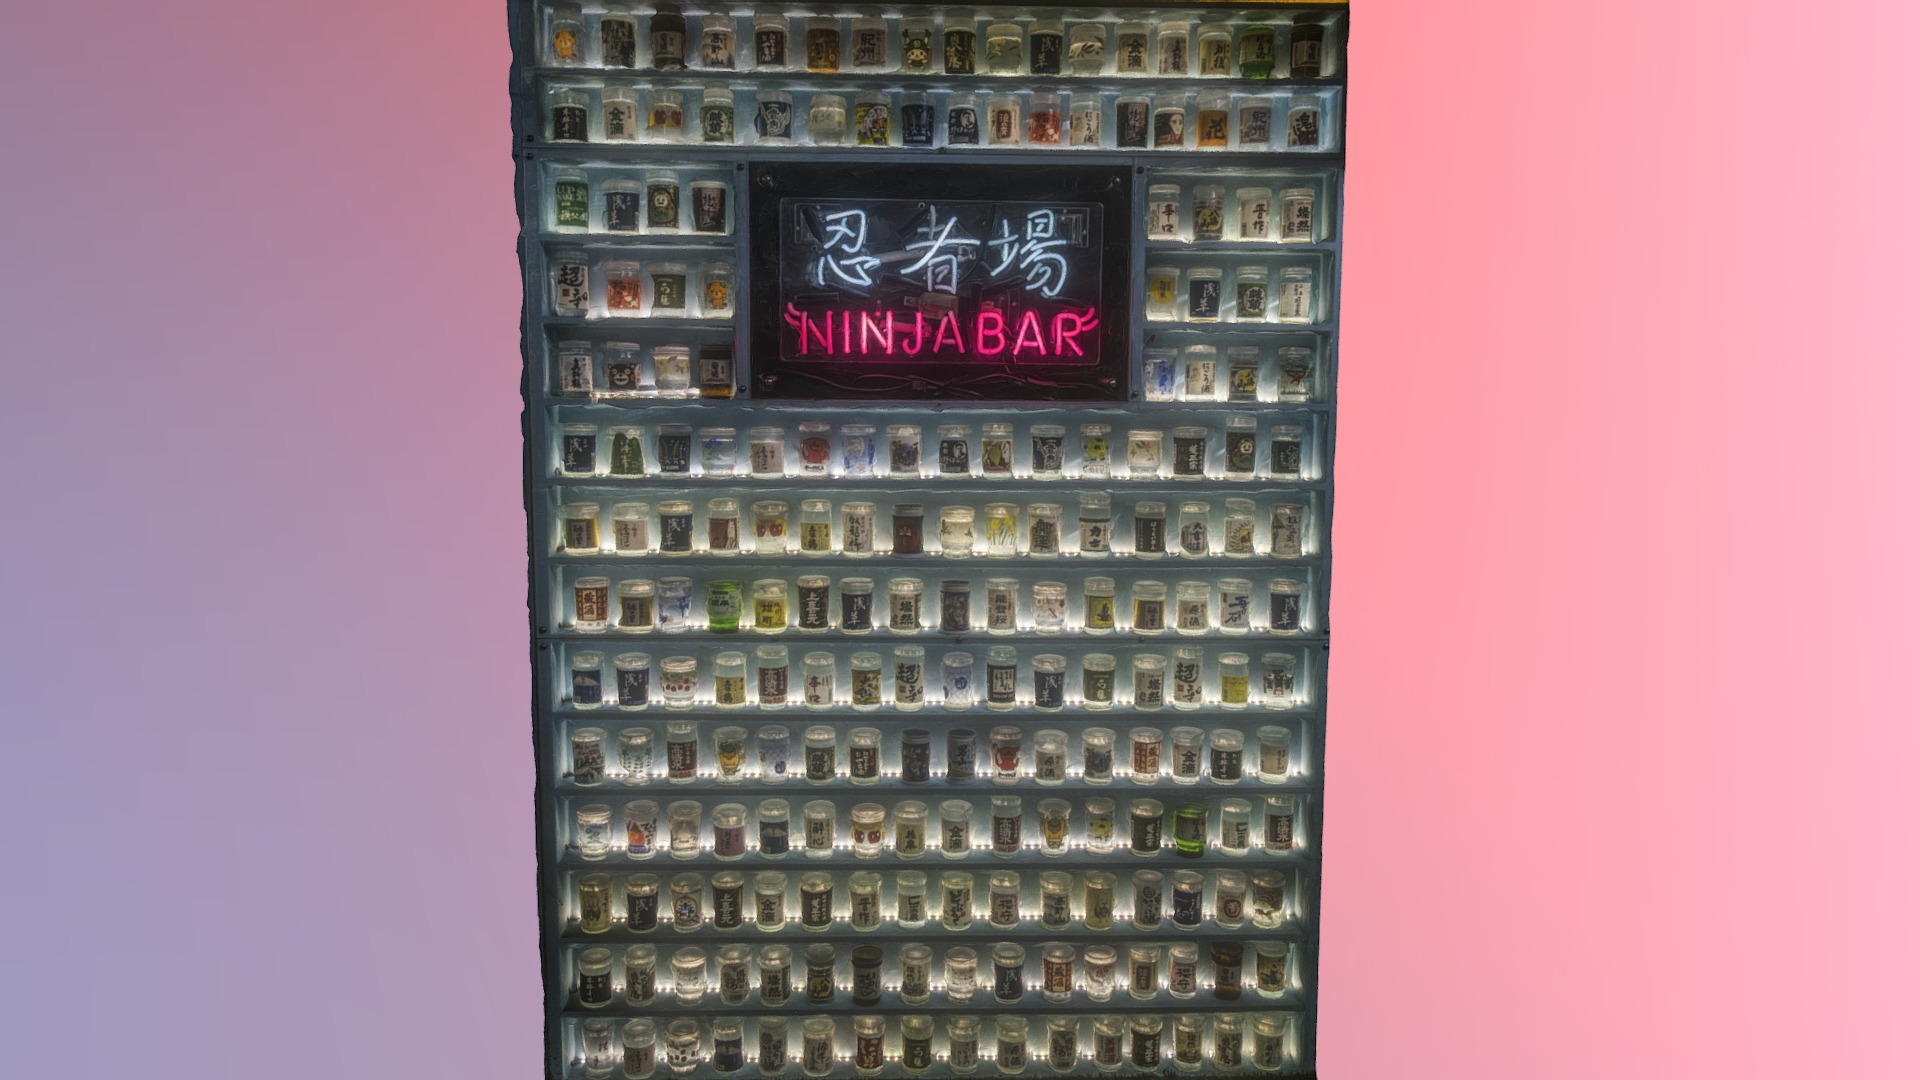 3D model Ninja bar front glasses - This is a 3D model of the Ninja bar front glasses. The 3D model is about a tall building with a sign on it.